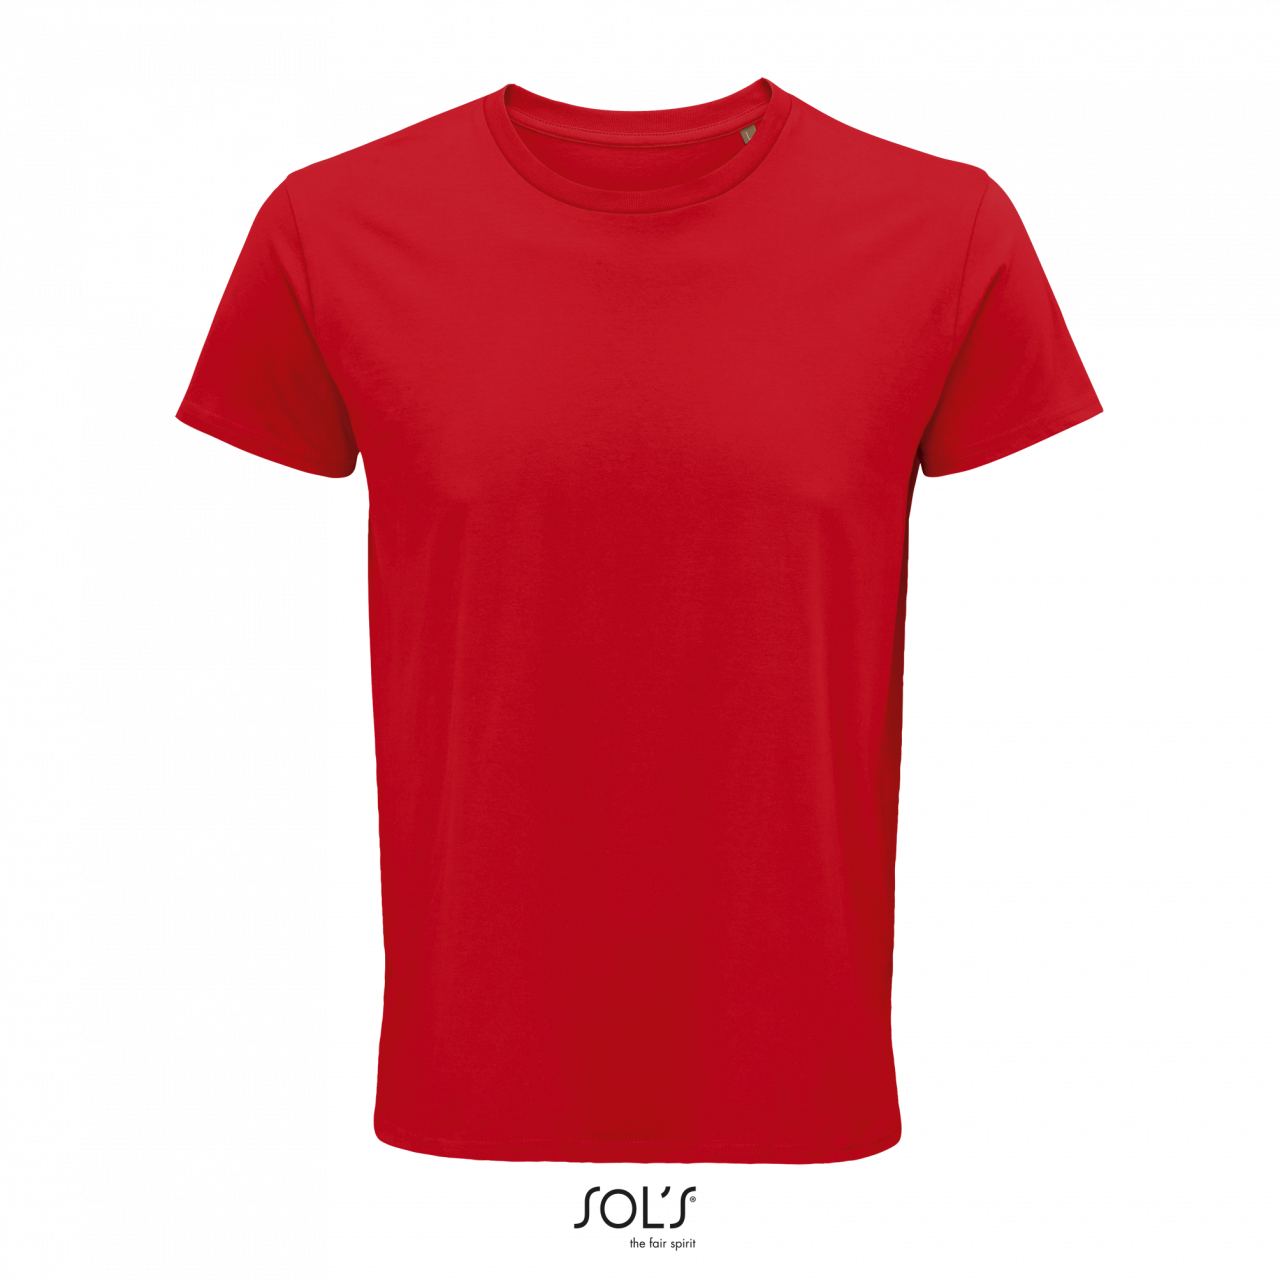 Sol's Crusader Men - Round-neck Fitted Jersey T-shirt - Sol's Crusader Men - Round-neck Fitted Jersey T-shirt - Red